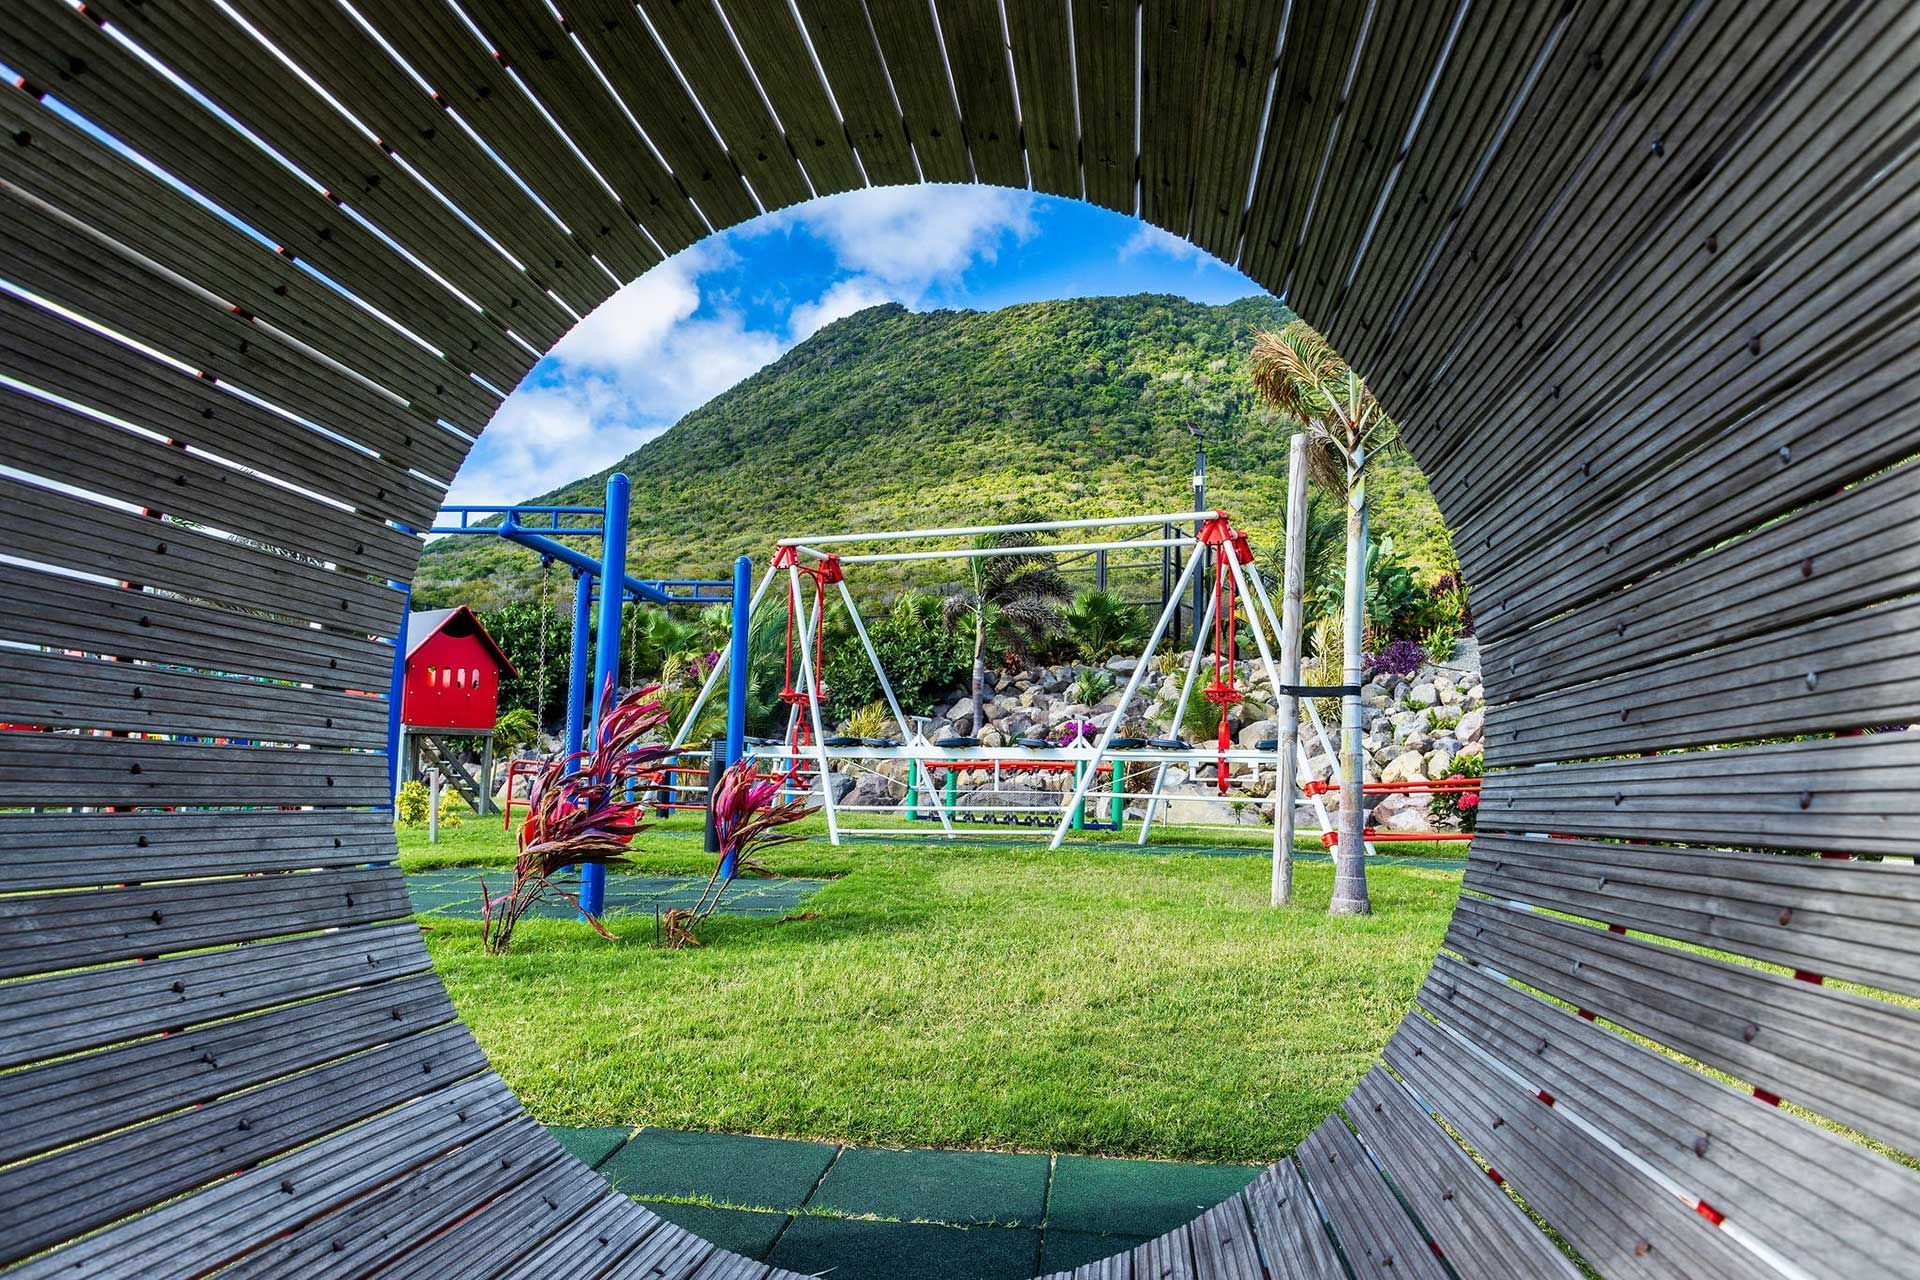 Playground view from a wooden barrel at Golden Rock Resort